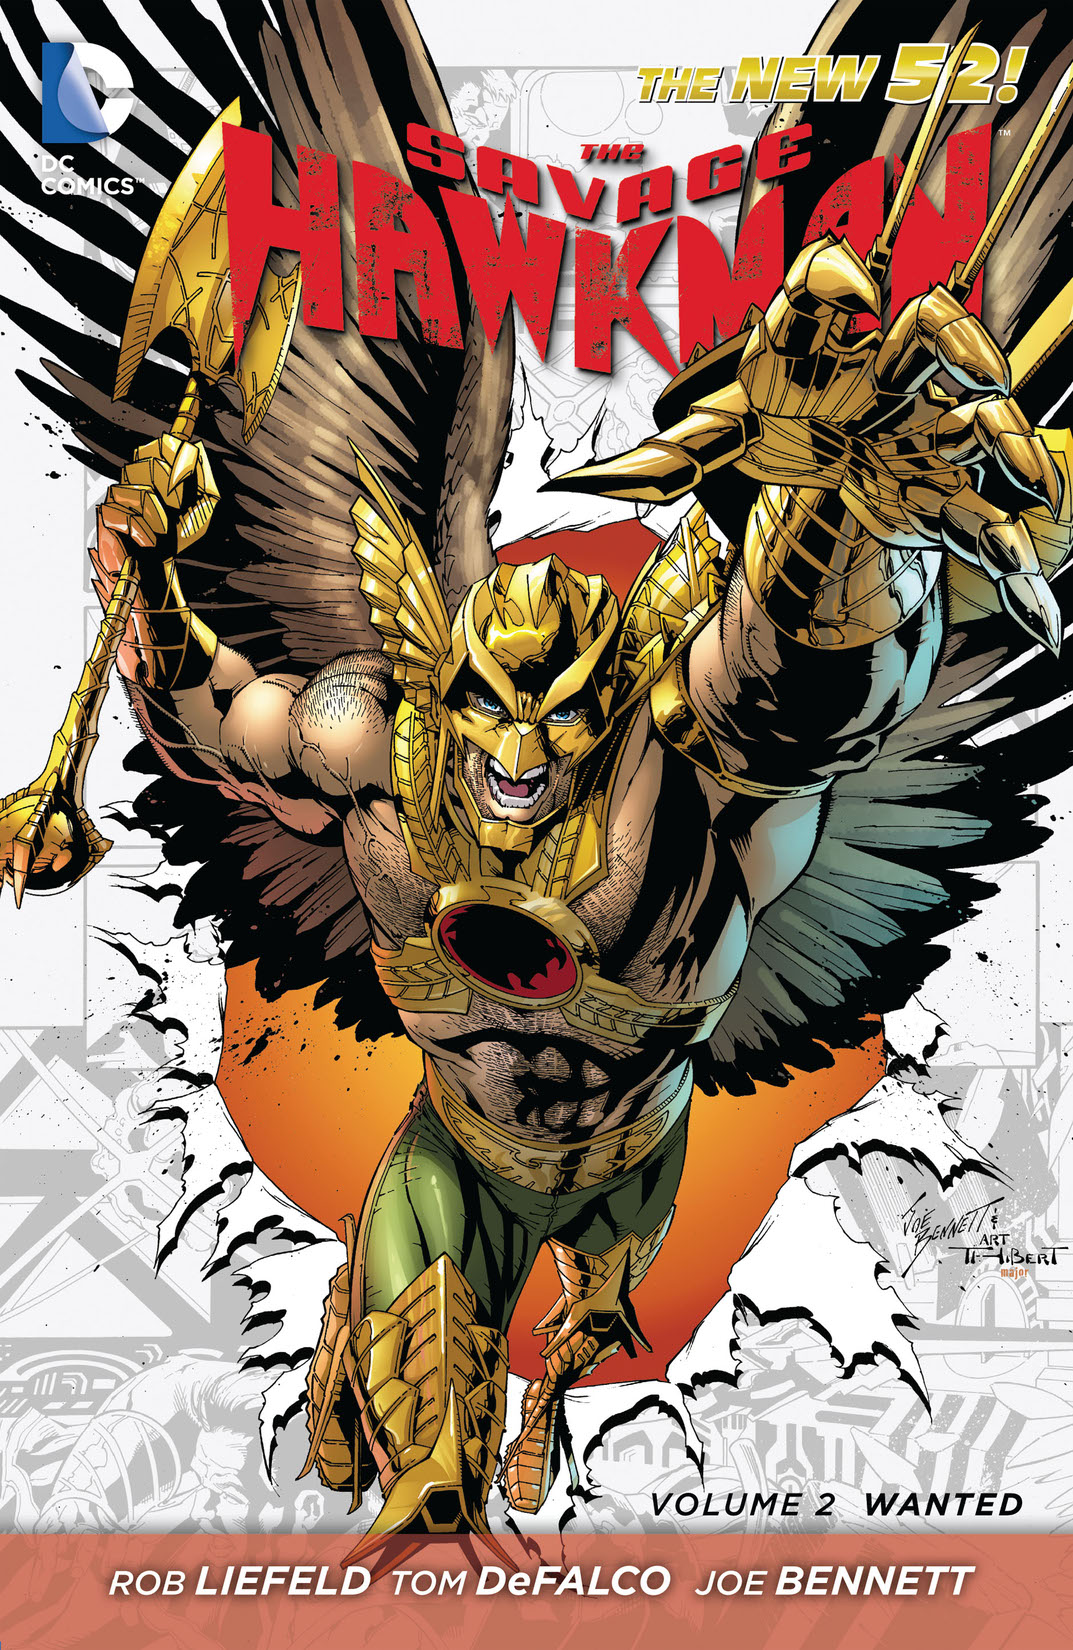 The Savage Hawkman Vol. 2: Wanted preview images